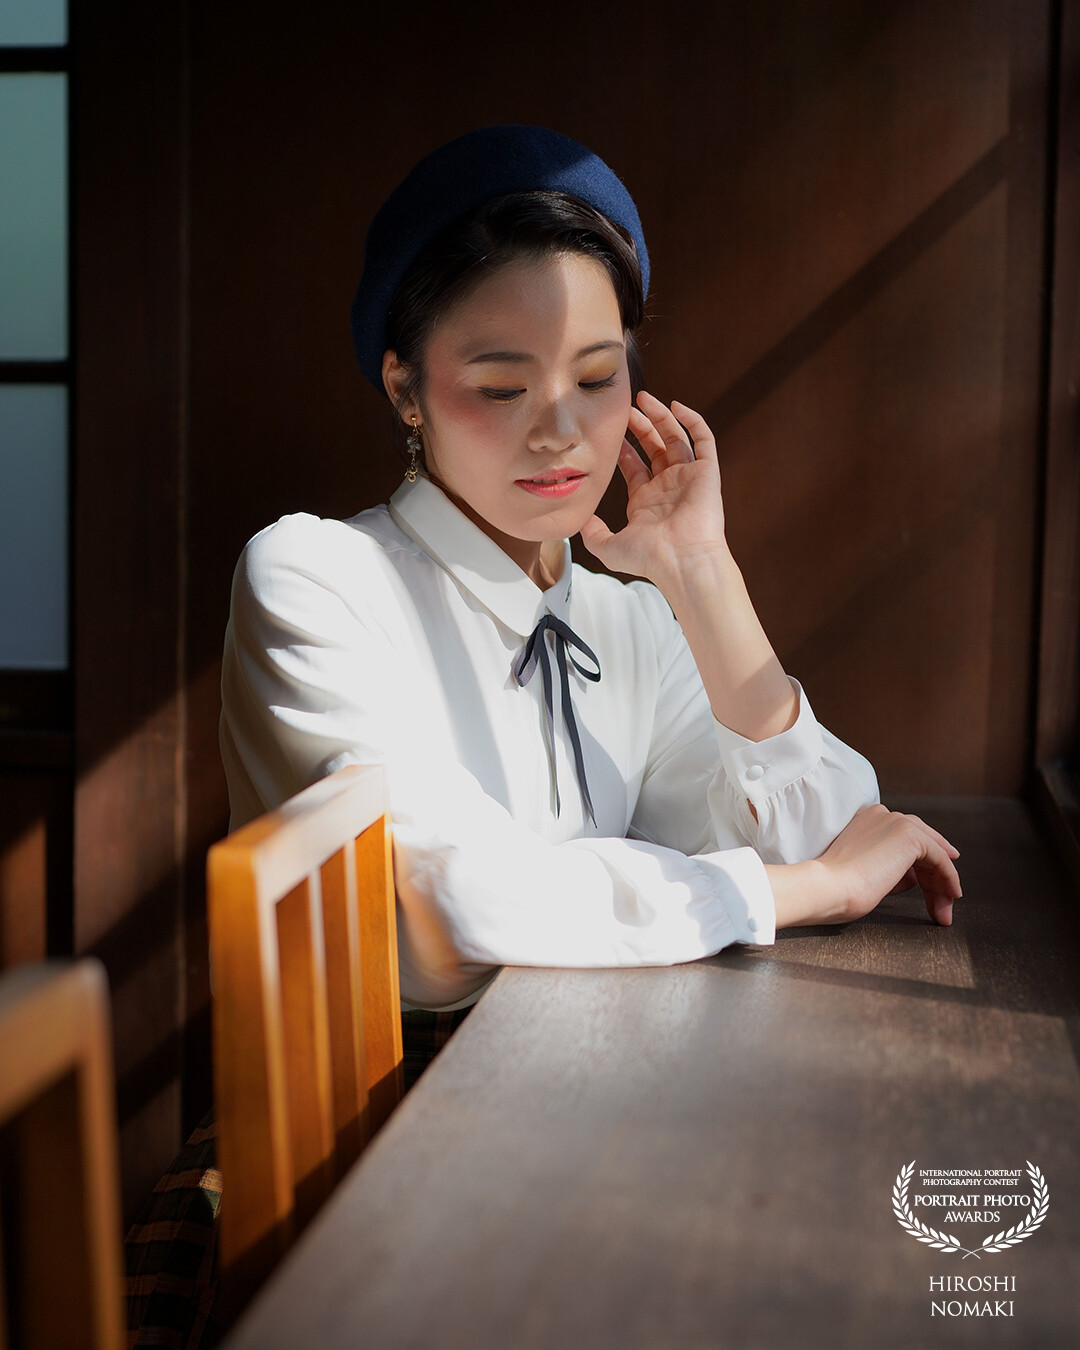 Photo Model: Ami Matsui @amimatsui_act<br />
Location: A museum in Tokyo<br />
<br />
She is a professional actress / dancer / singer. She is from Osaka, Japan. She shows an outstanding performance in Tokyo area now. <br />
<br />
I had Johannes Vermeer's artworks in my mind when I took this photo. Natural light only. It was beautiful sunny afternoon. I made the most of the gentle light from the window.